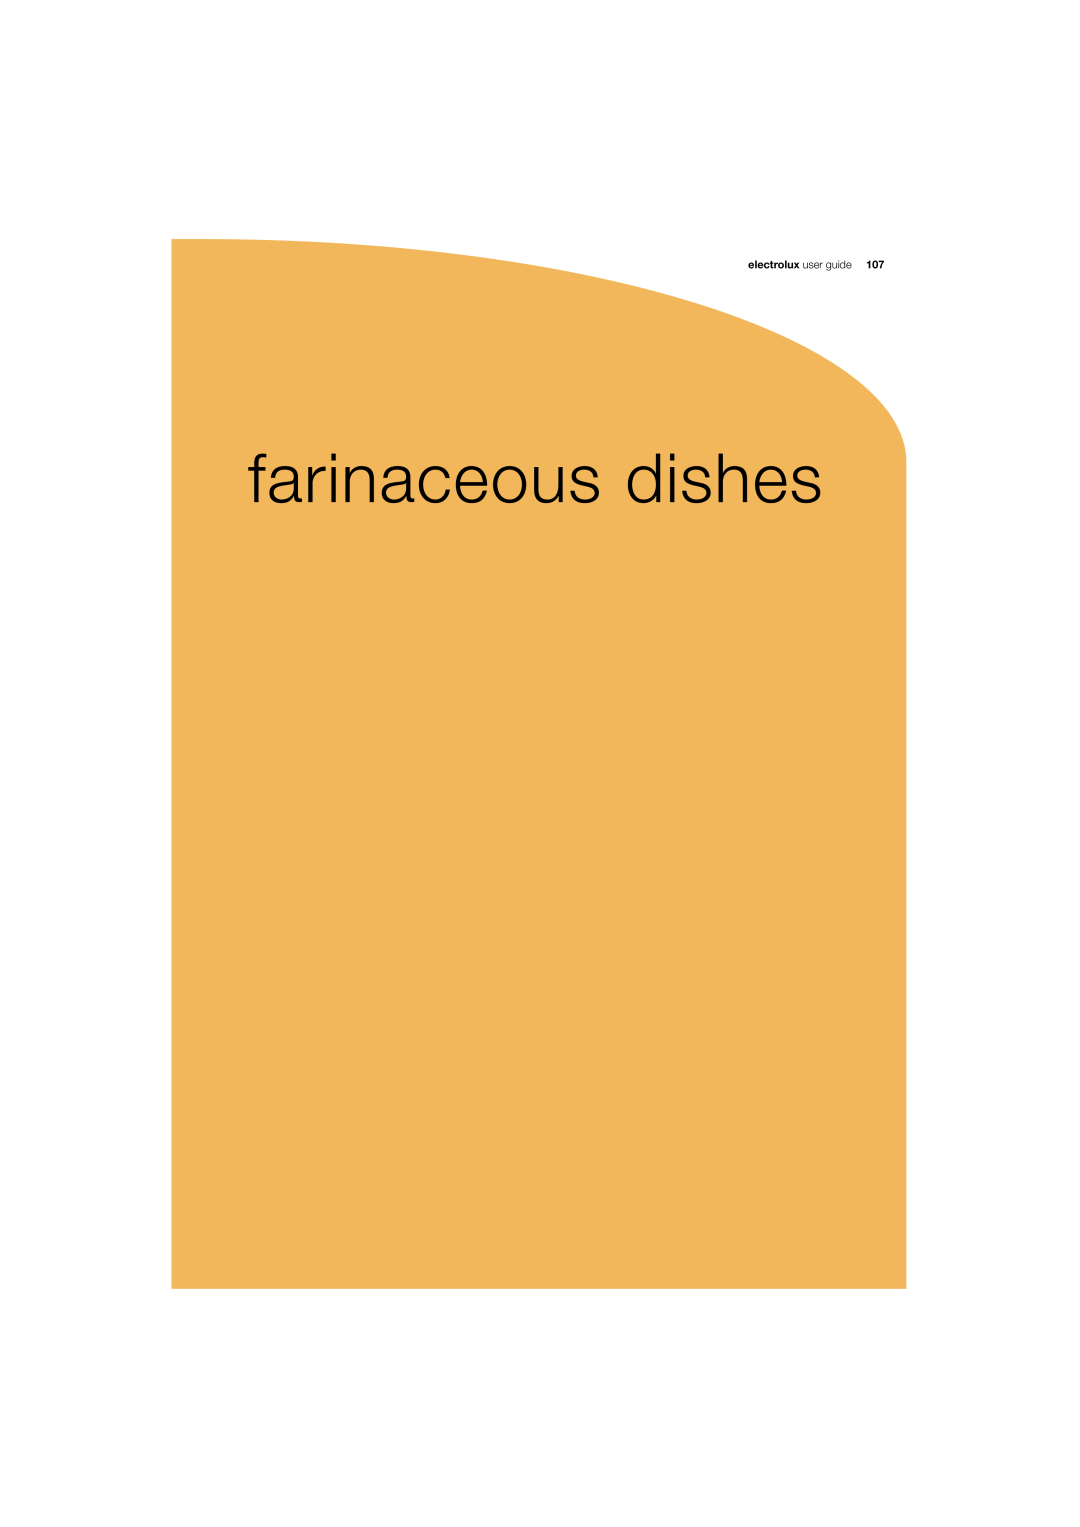 Electrolux 180 manual farinaceous dishes, electrolux user guide 